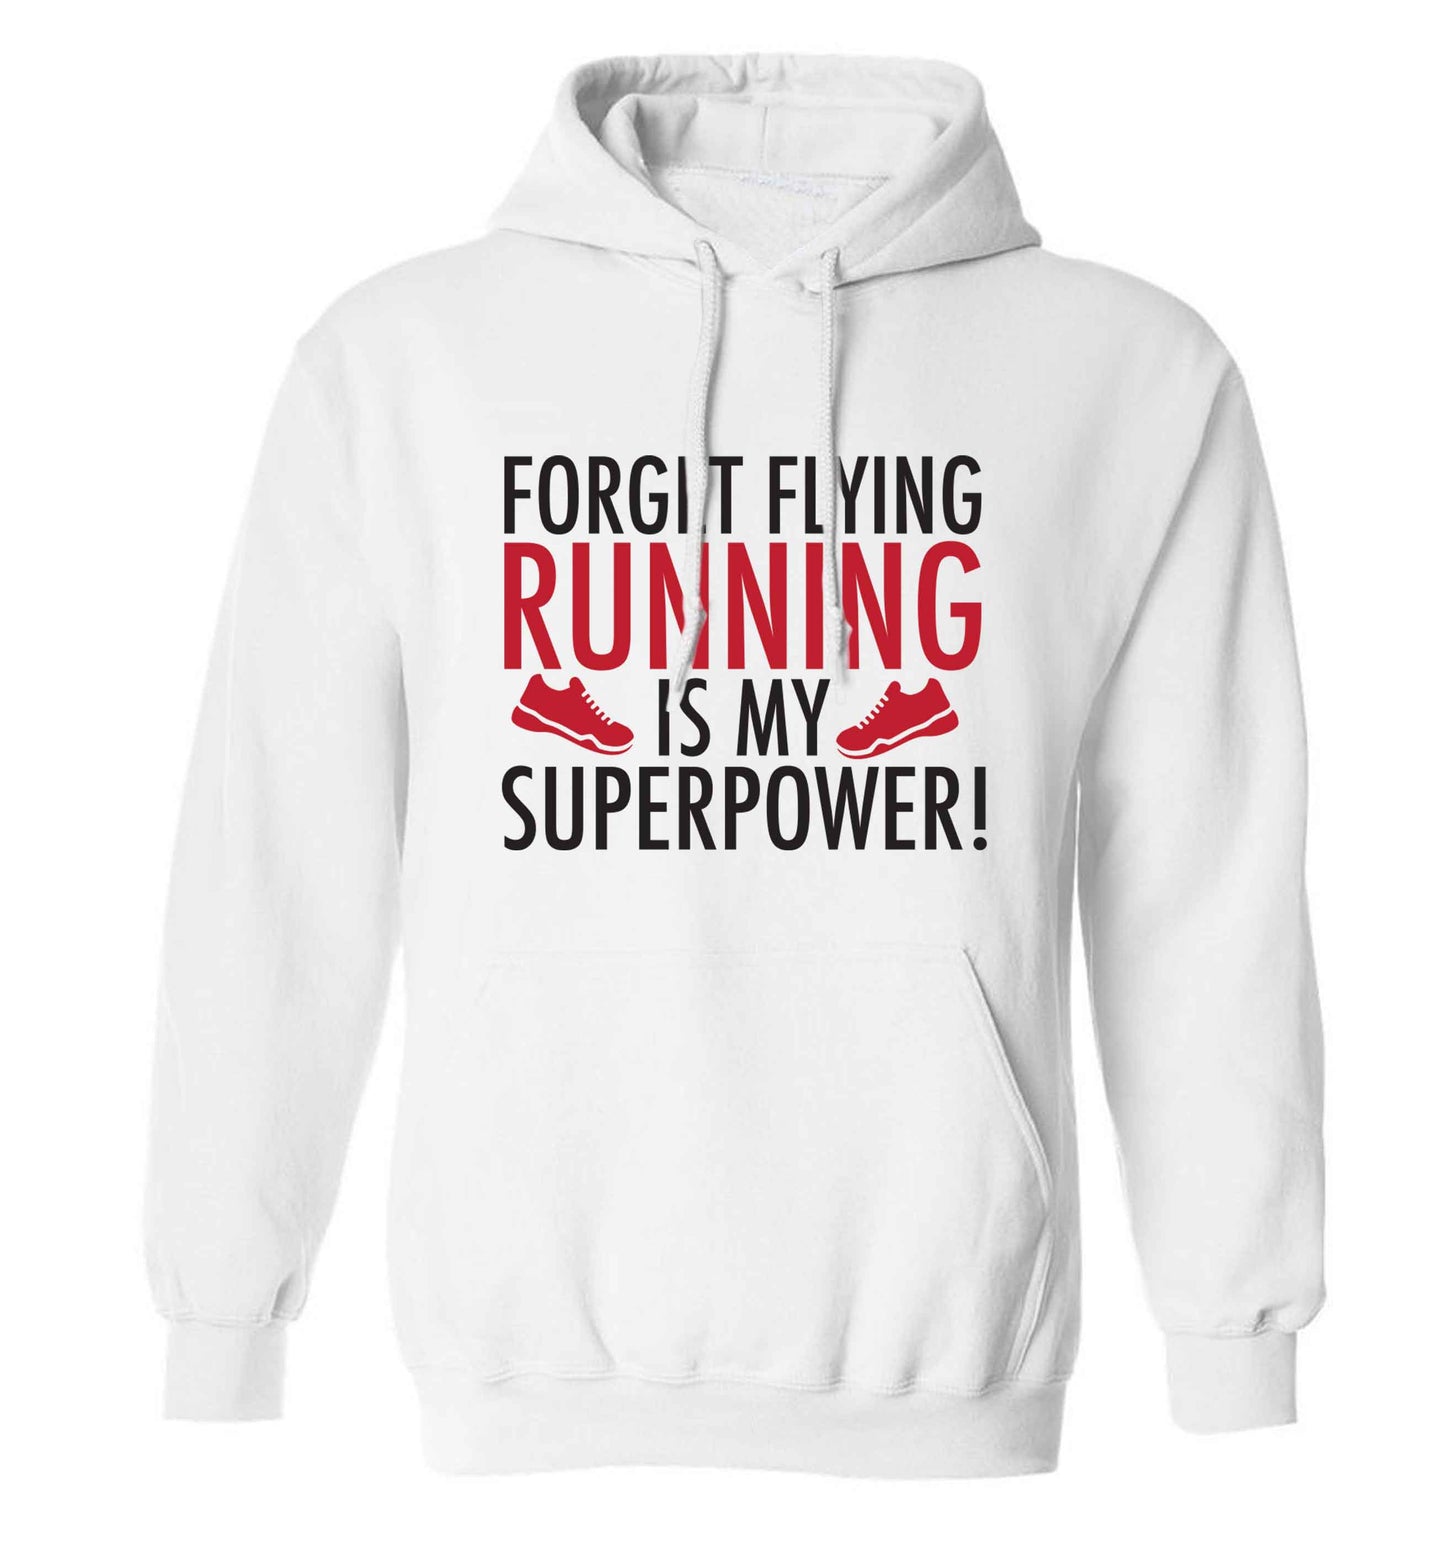 Forget flying running is my superpower adults unisex white hoodie 2XL